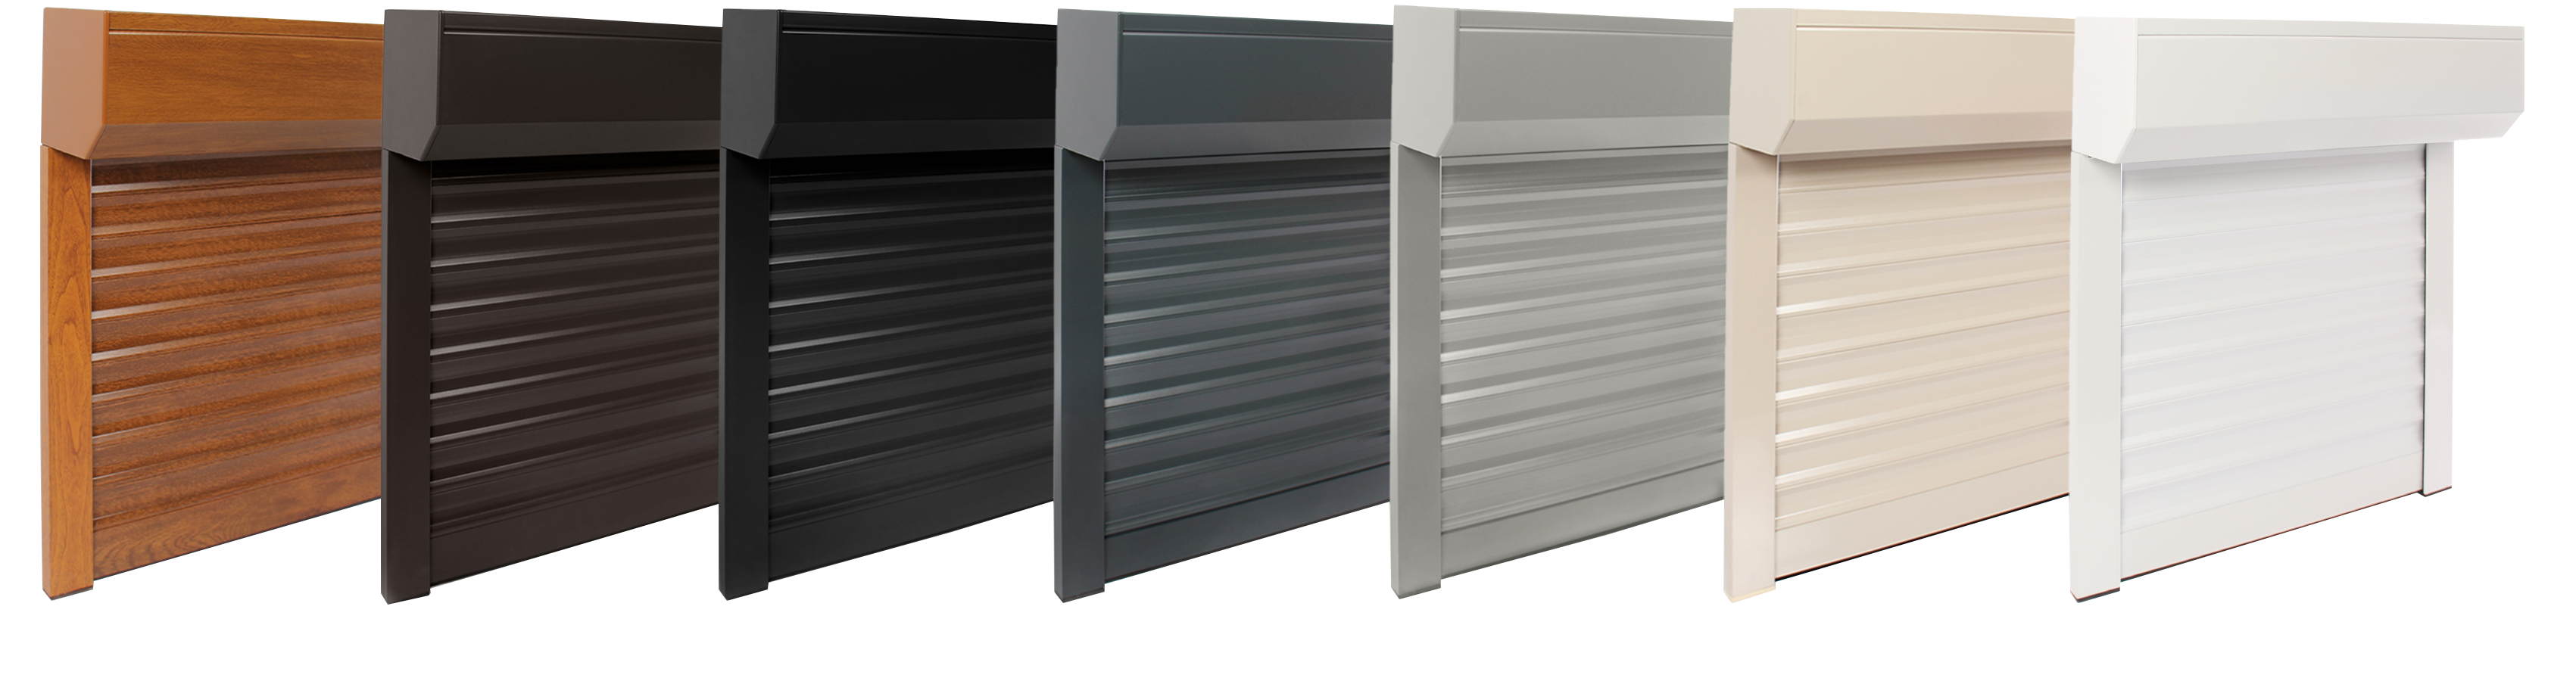 colour selection roller shutters